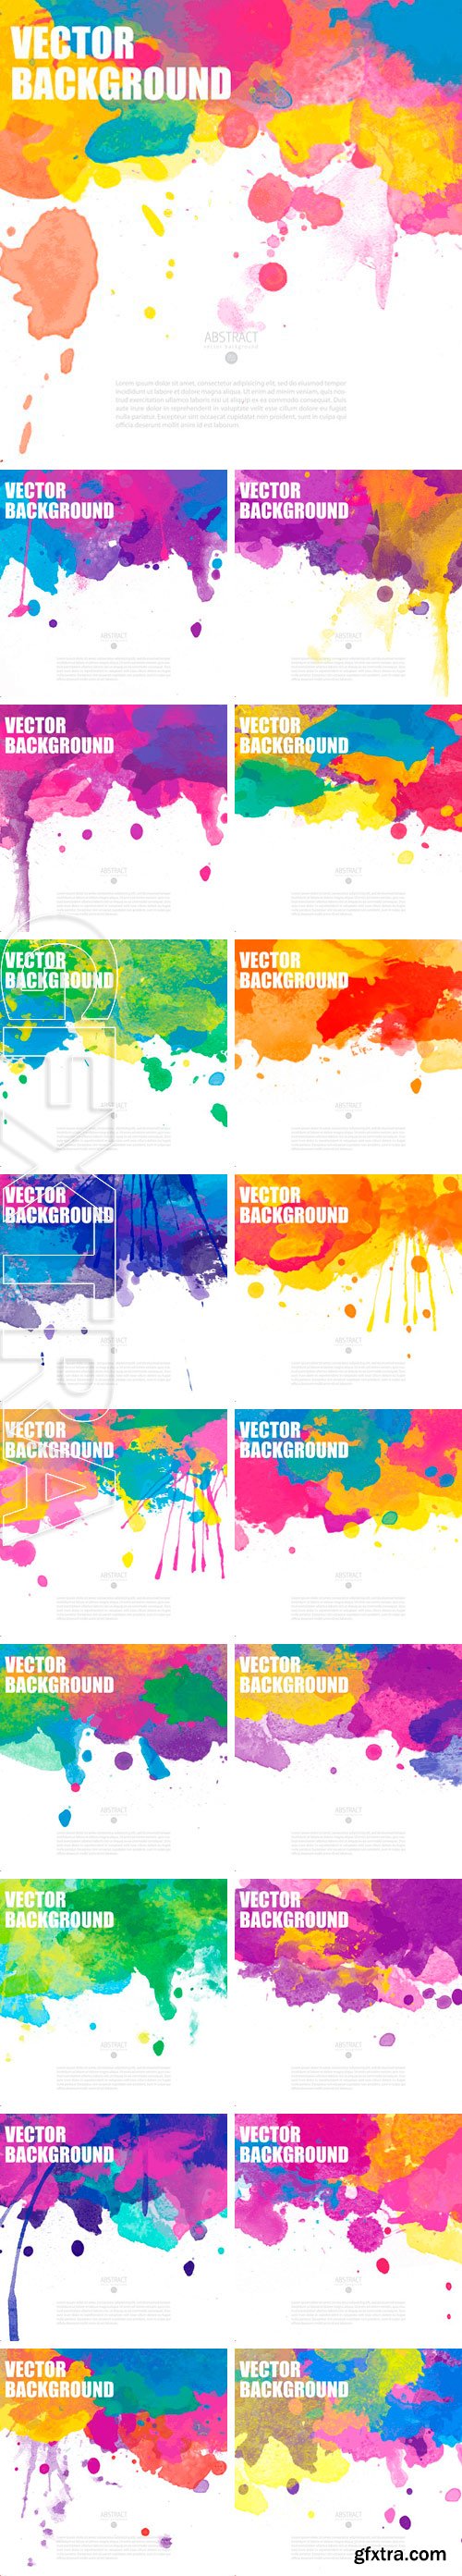 Stock Vectors - Colorful Poster Templates with Watercolor Paint Splash. Abstract Background